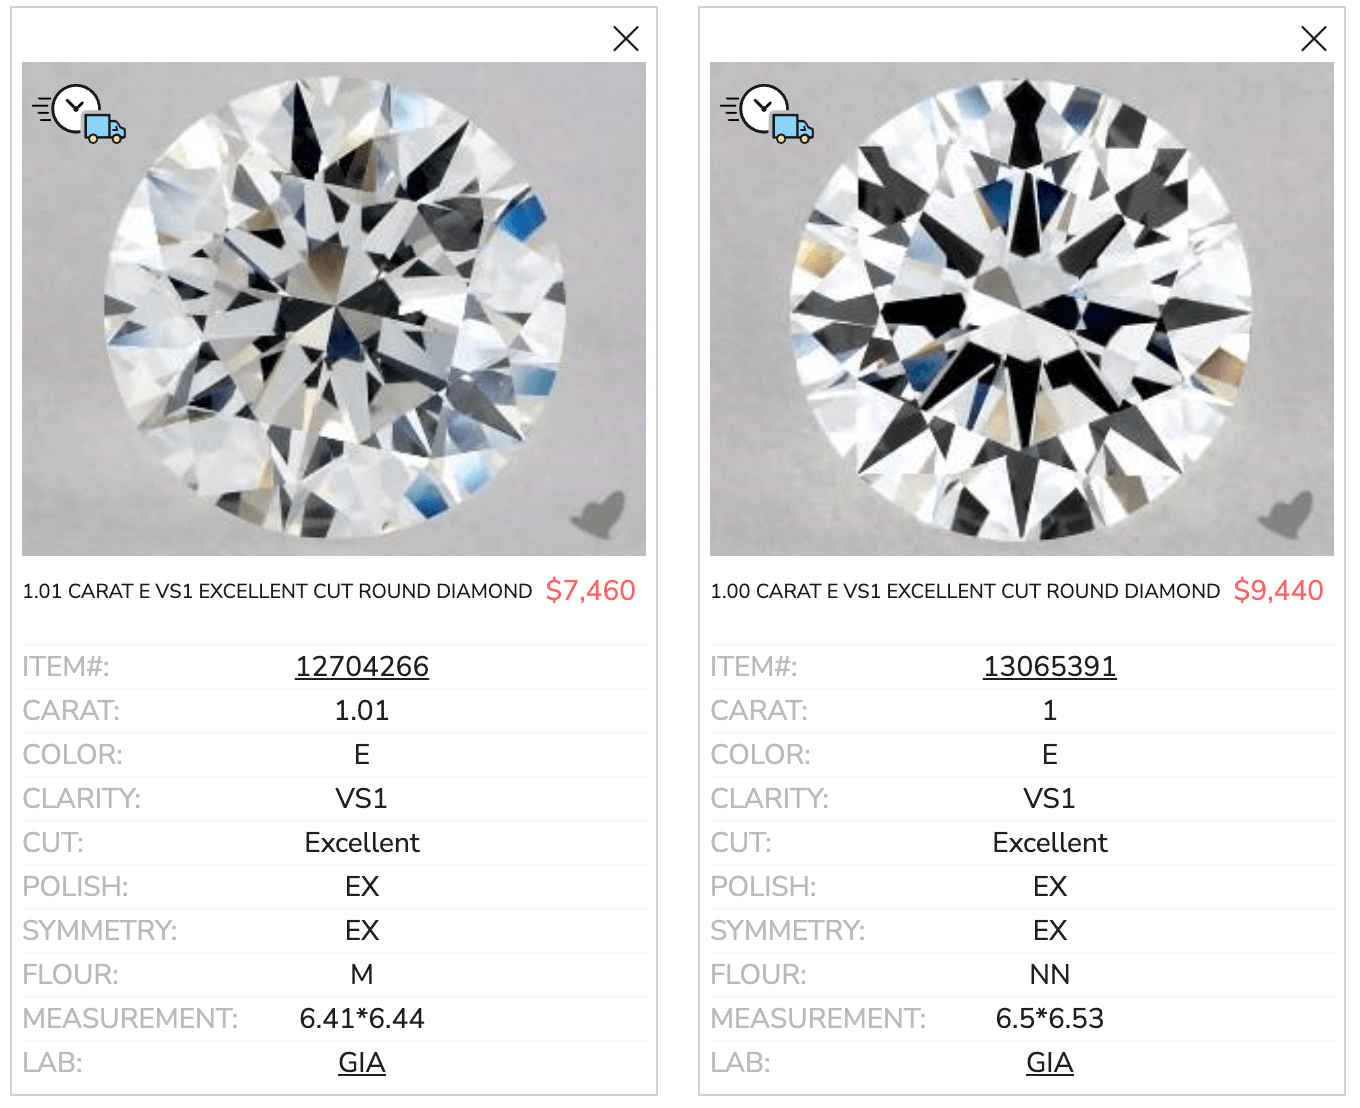 Two colorless diamonds with and without fluorescent properties